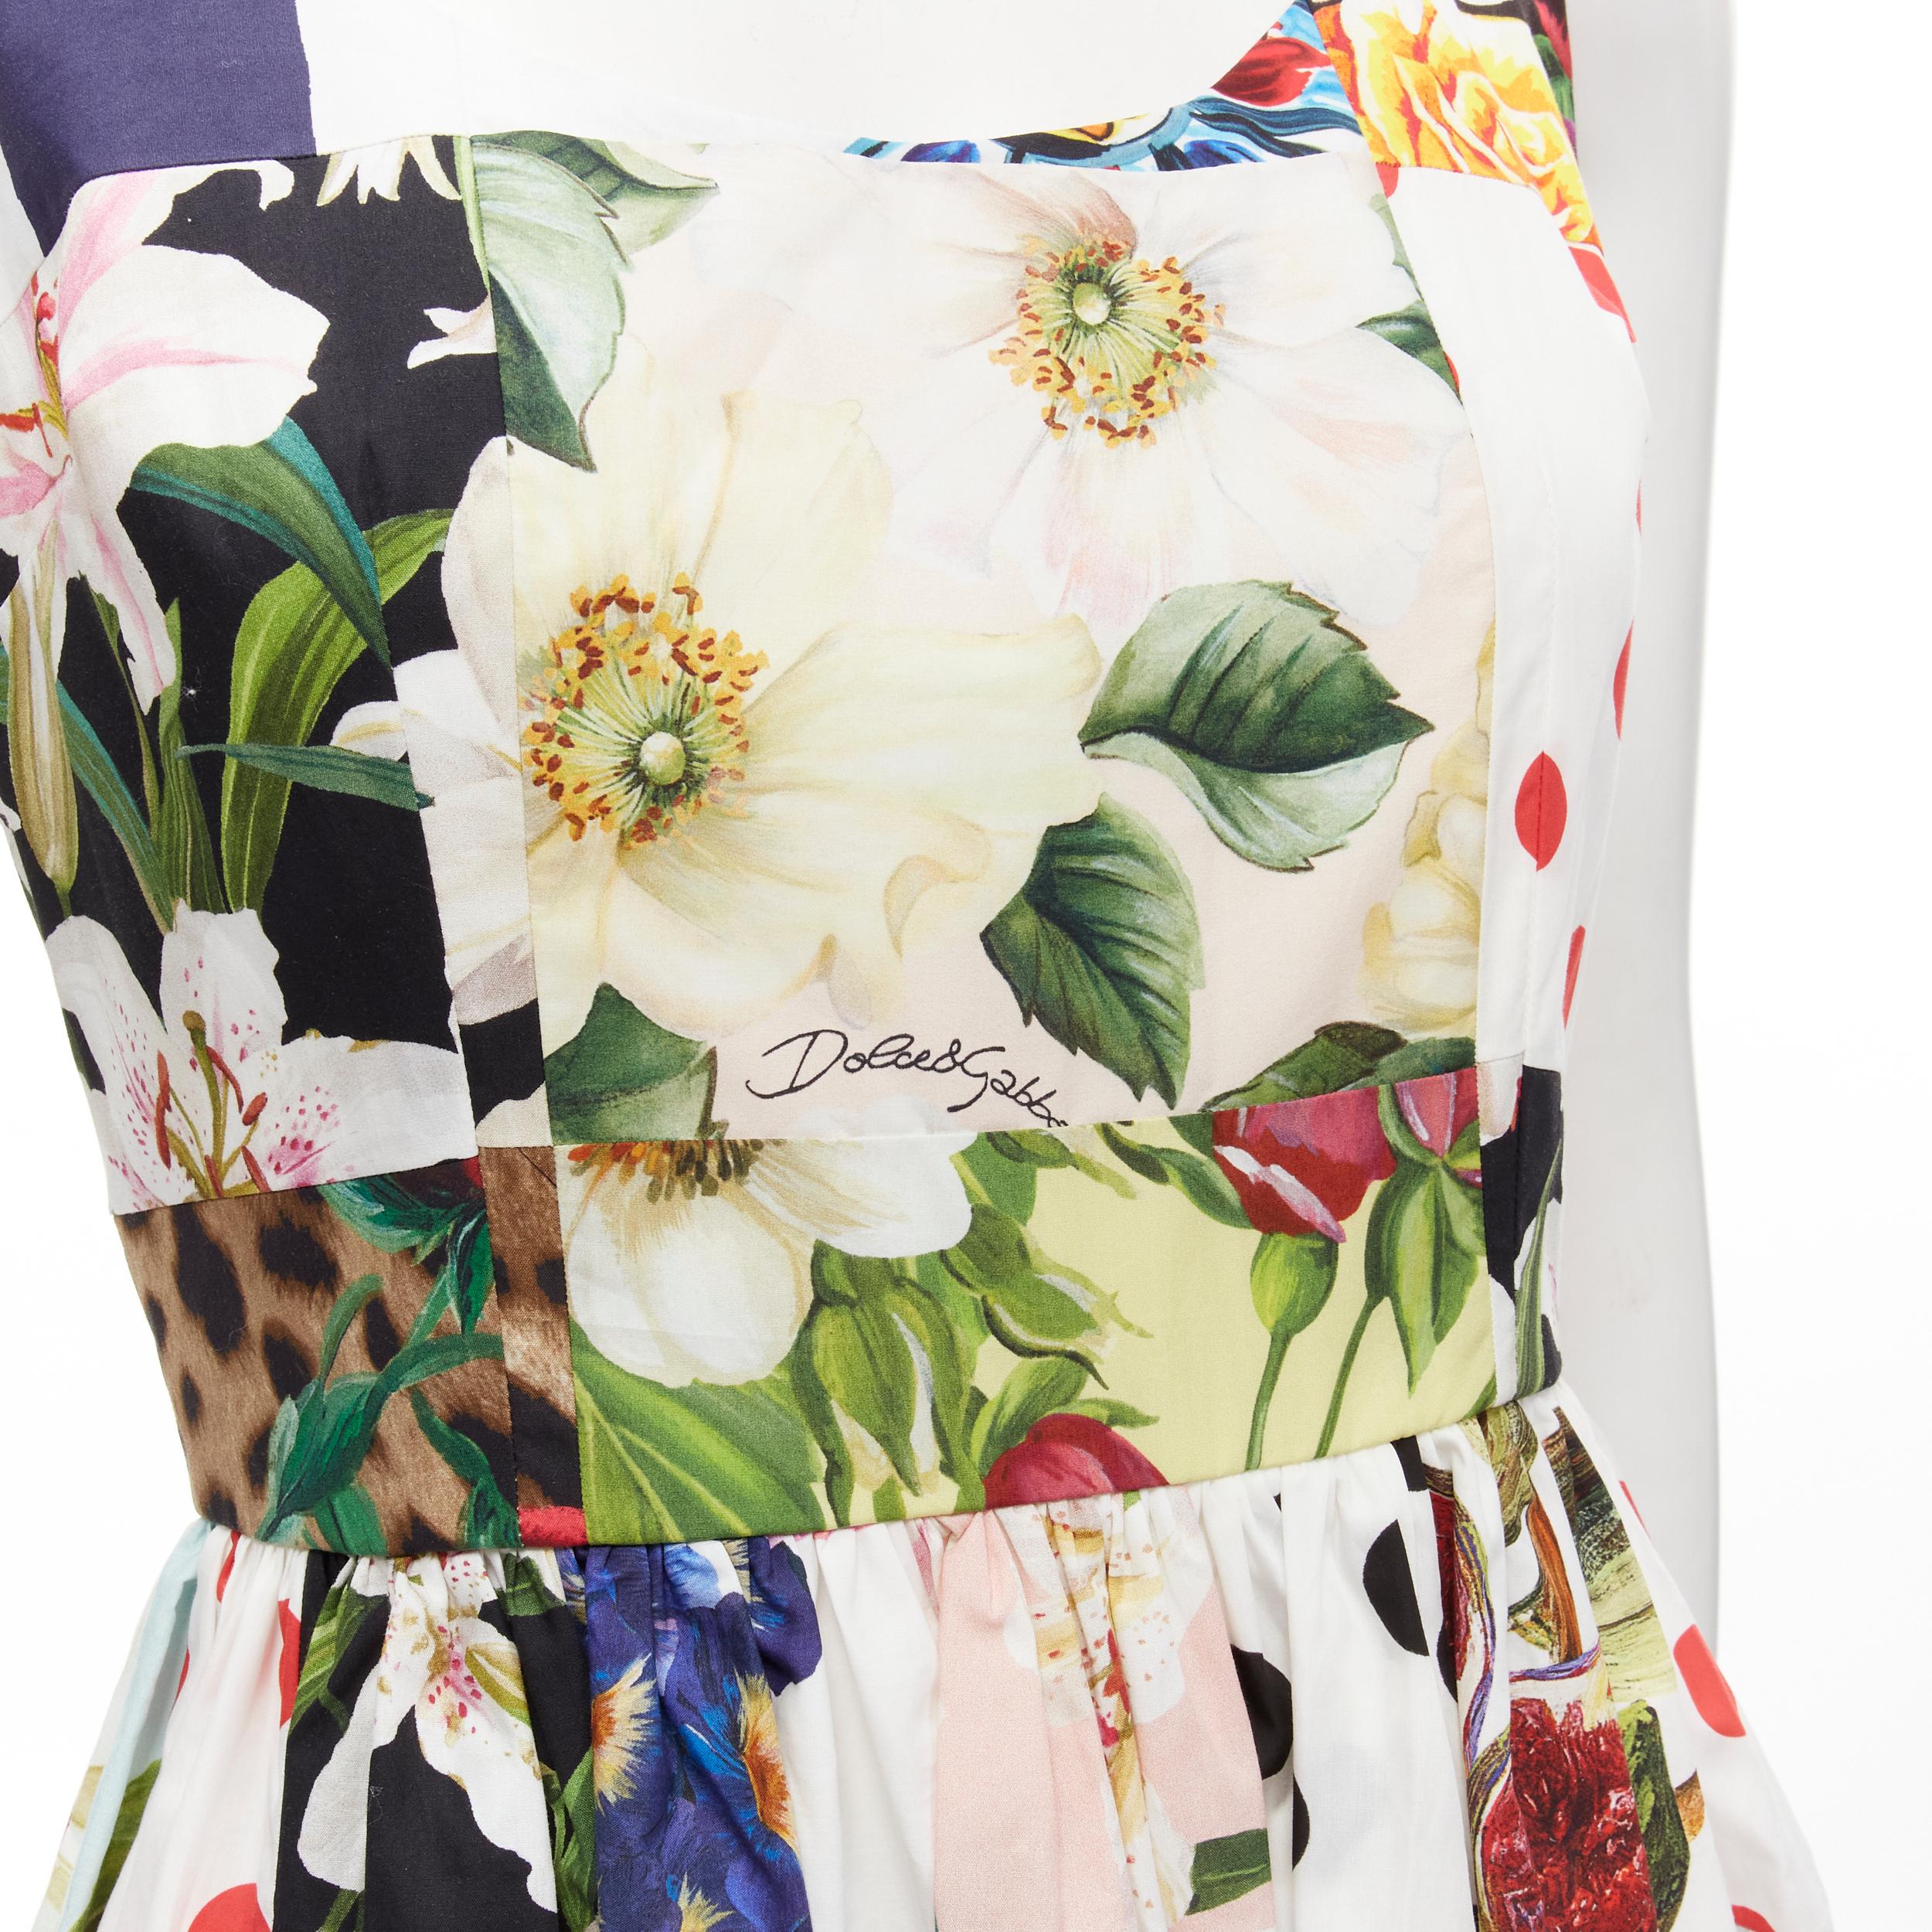 DOLCE GABBANA mixed patchwork cotton print floral flared midi dress IT38 XS
Brand: Dolce Gabbana
Designer: Domenico Dolce and Stefano Gabbana
Material: Cotton
Color: White
Pattern: Floral
Closure: Zip
Extra Detail: Scoop neckline. Patchwork floral